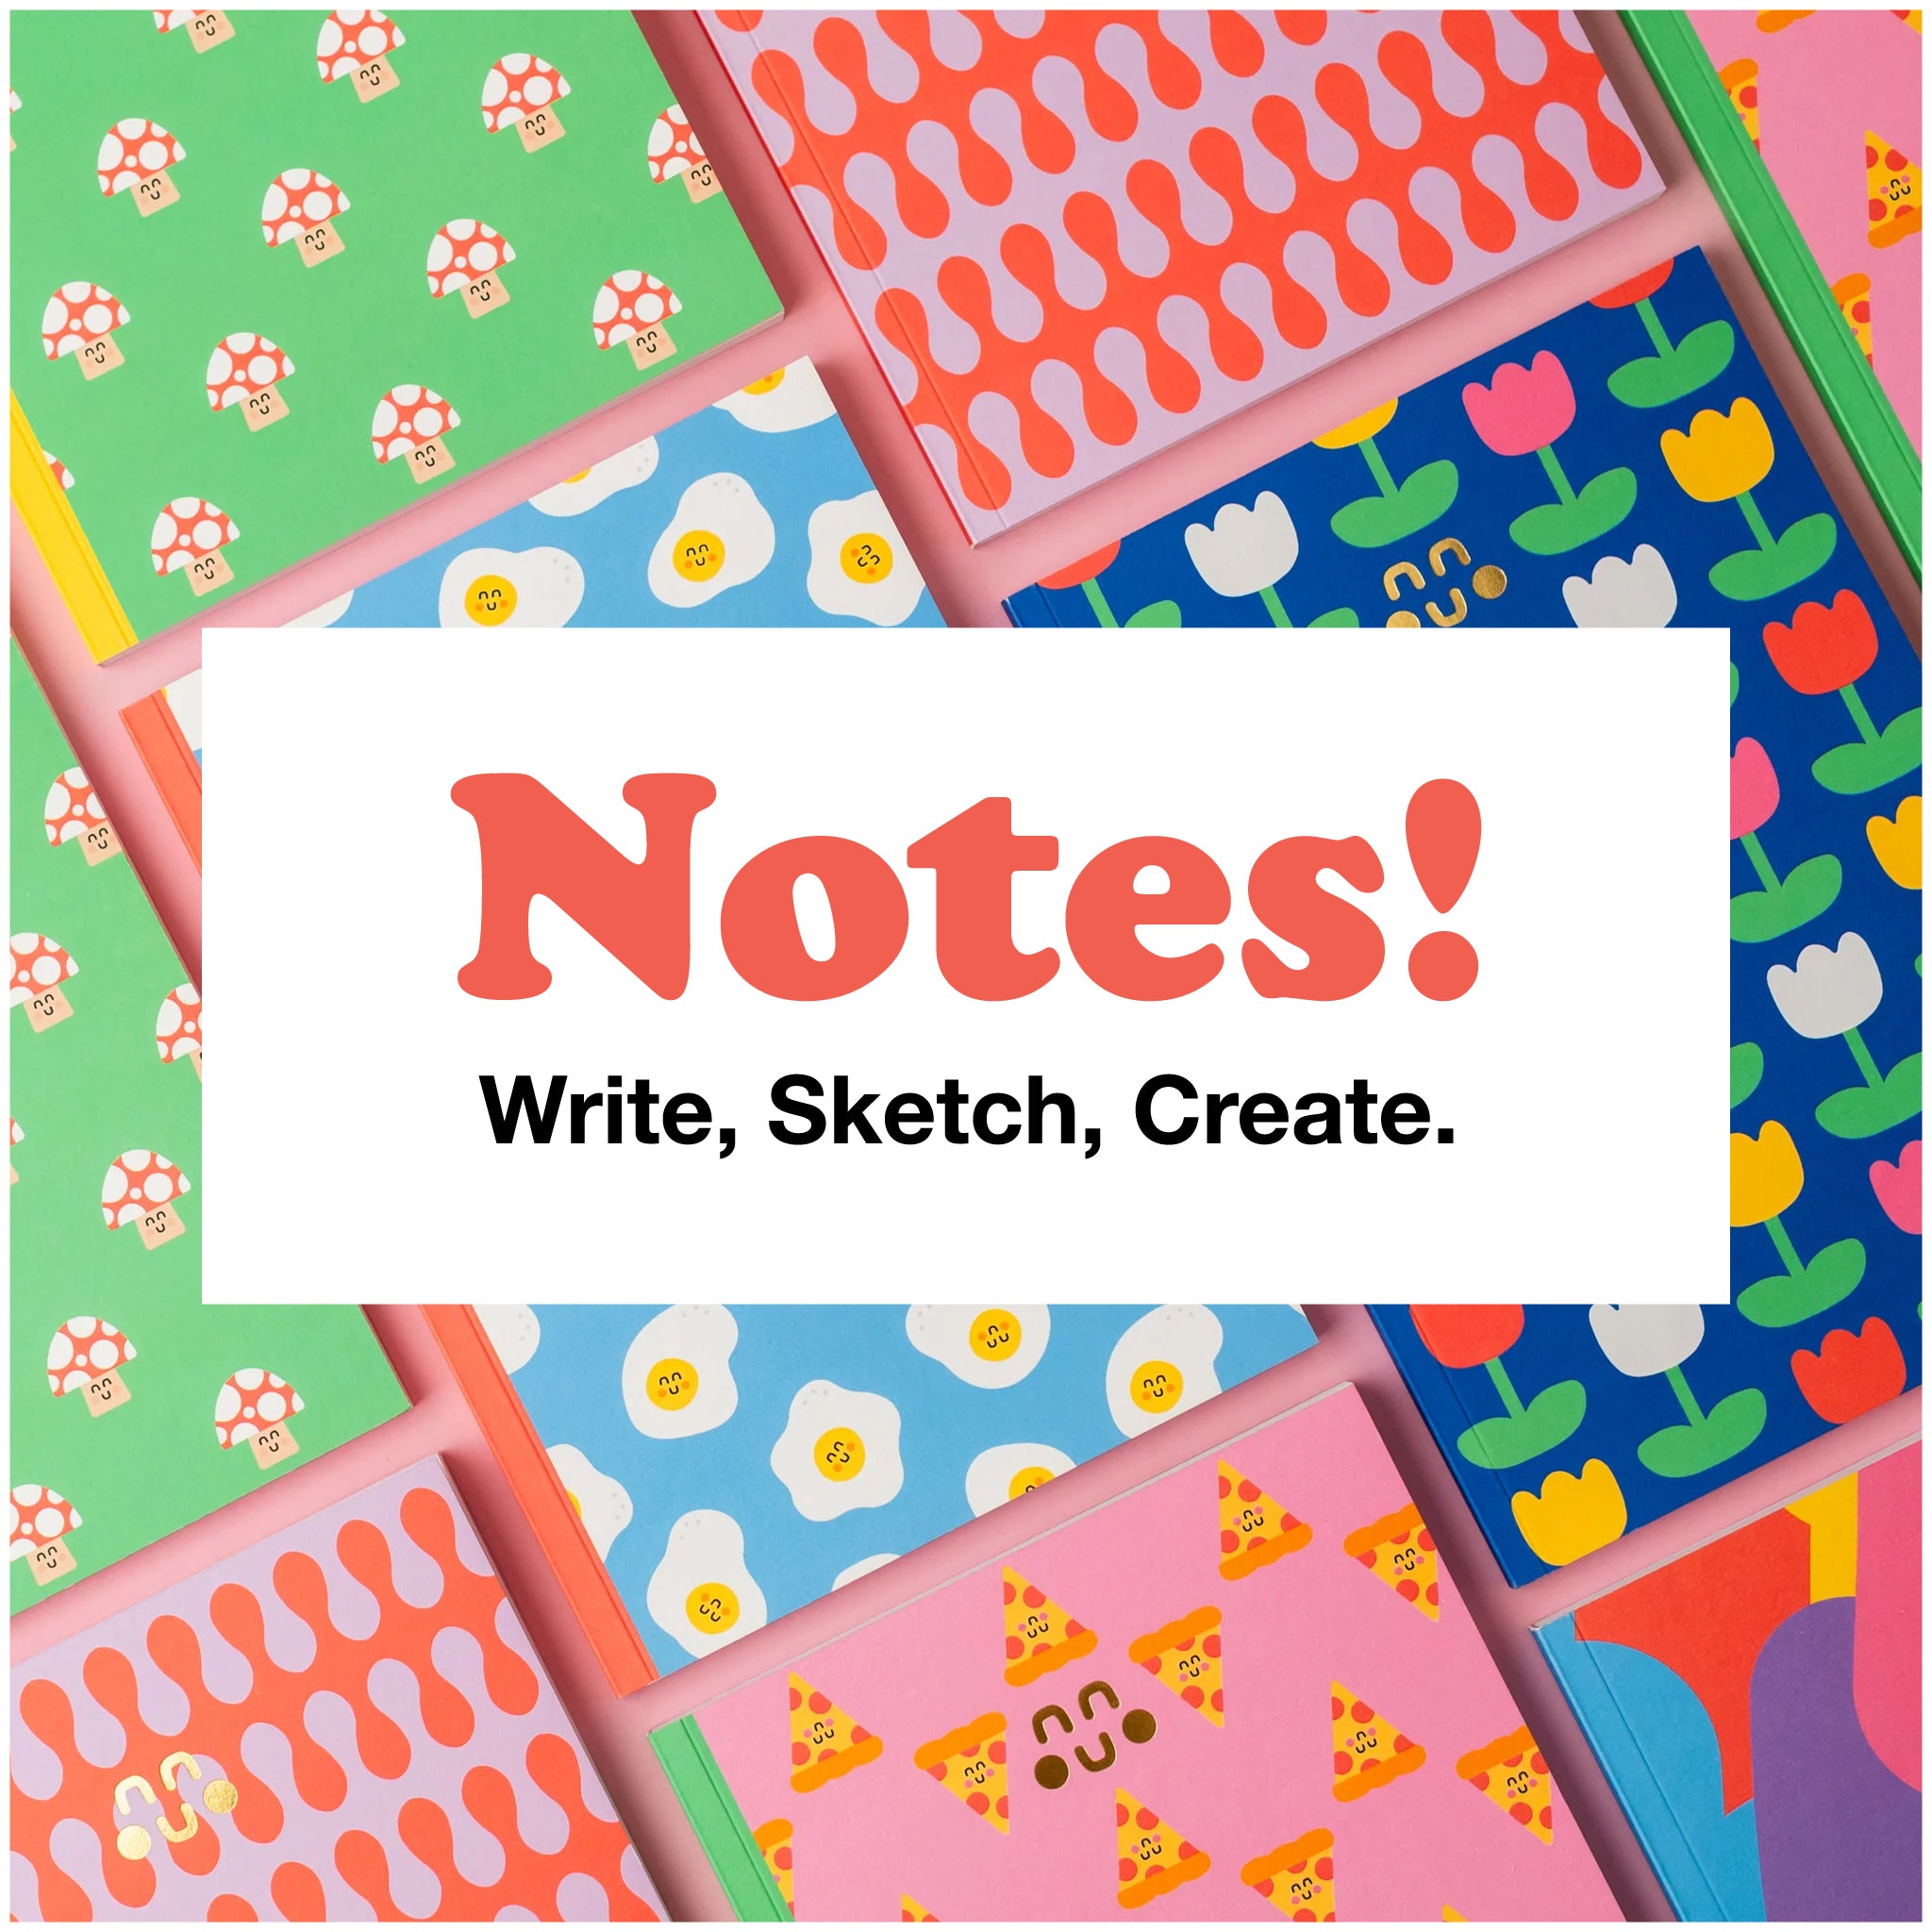 image of several colourful notebooks with text overlayed reading notes, write, sketch, create.